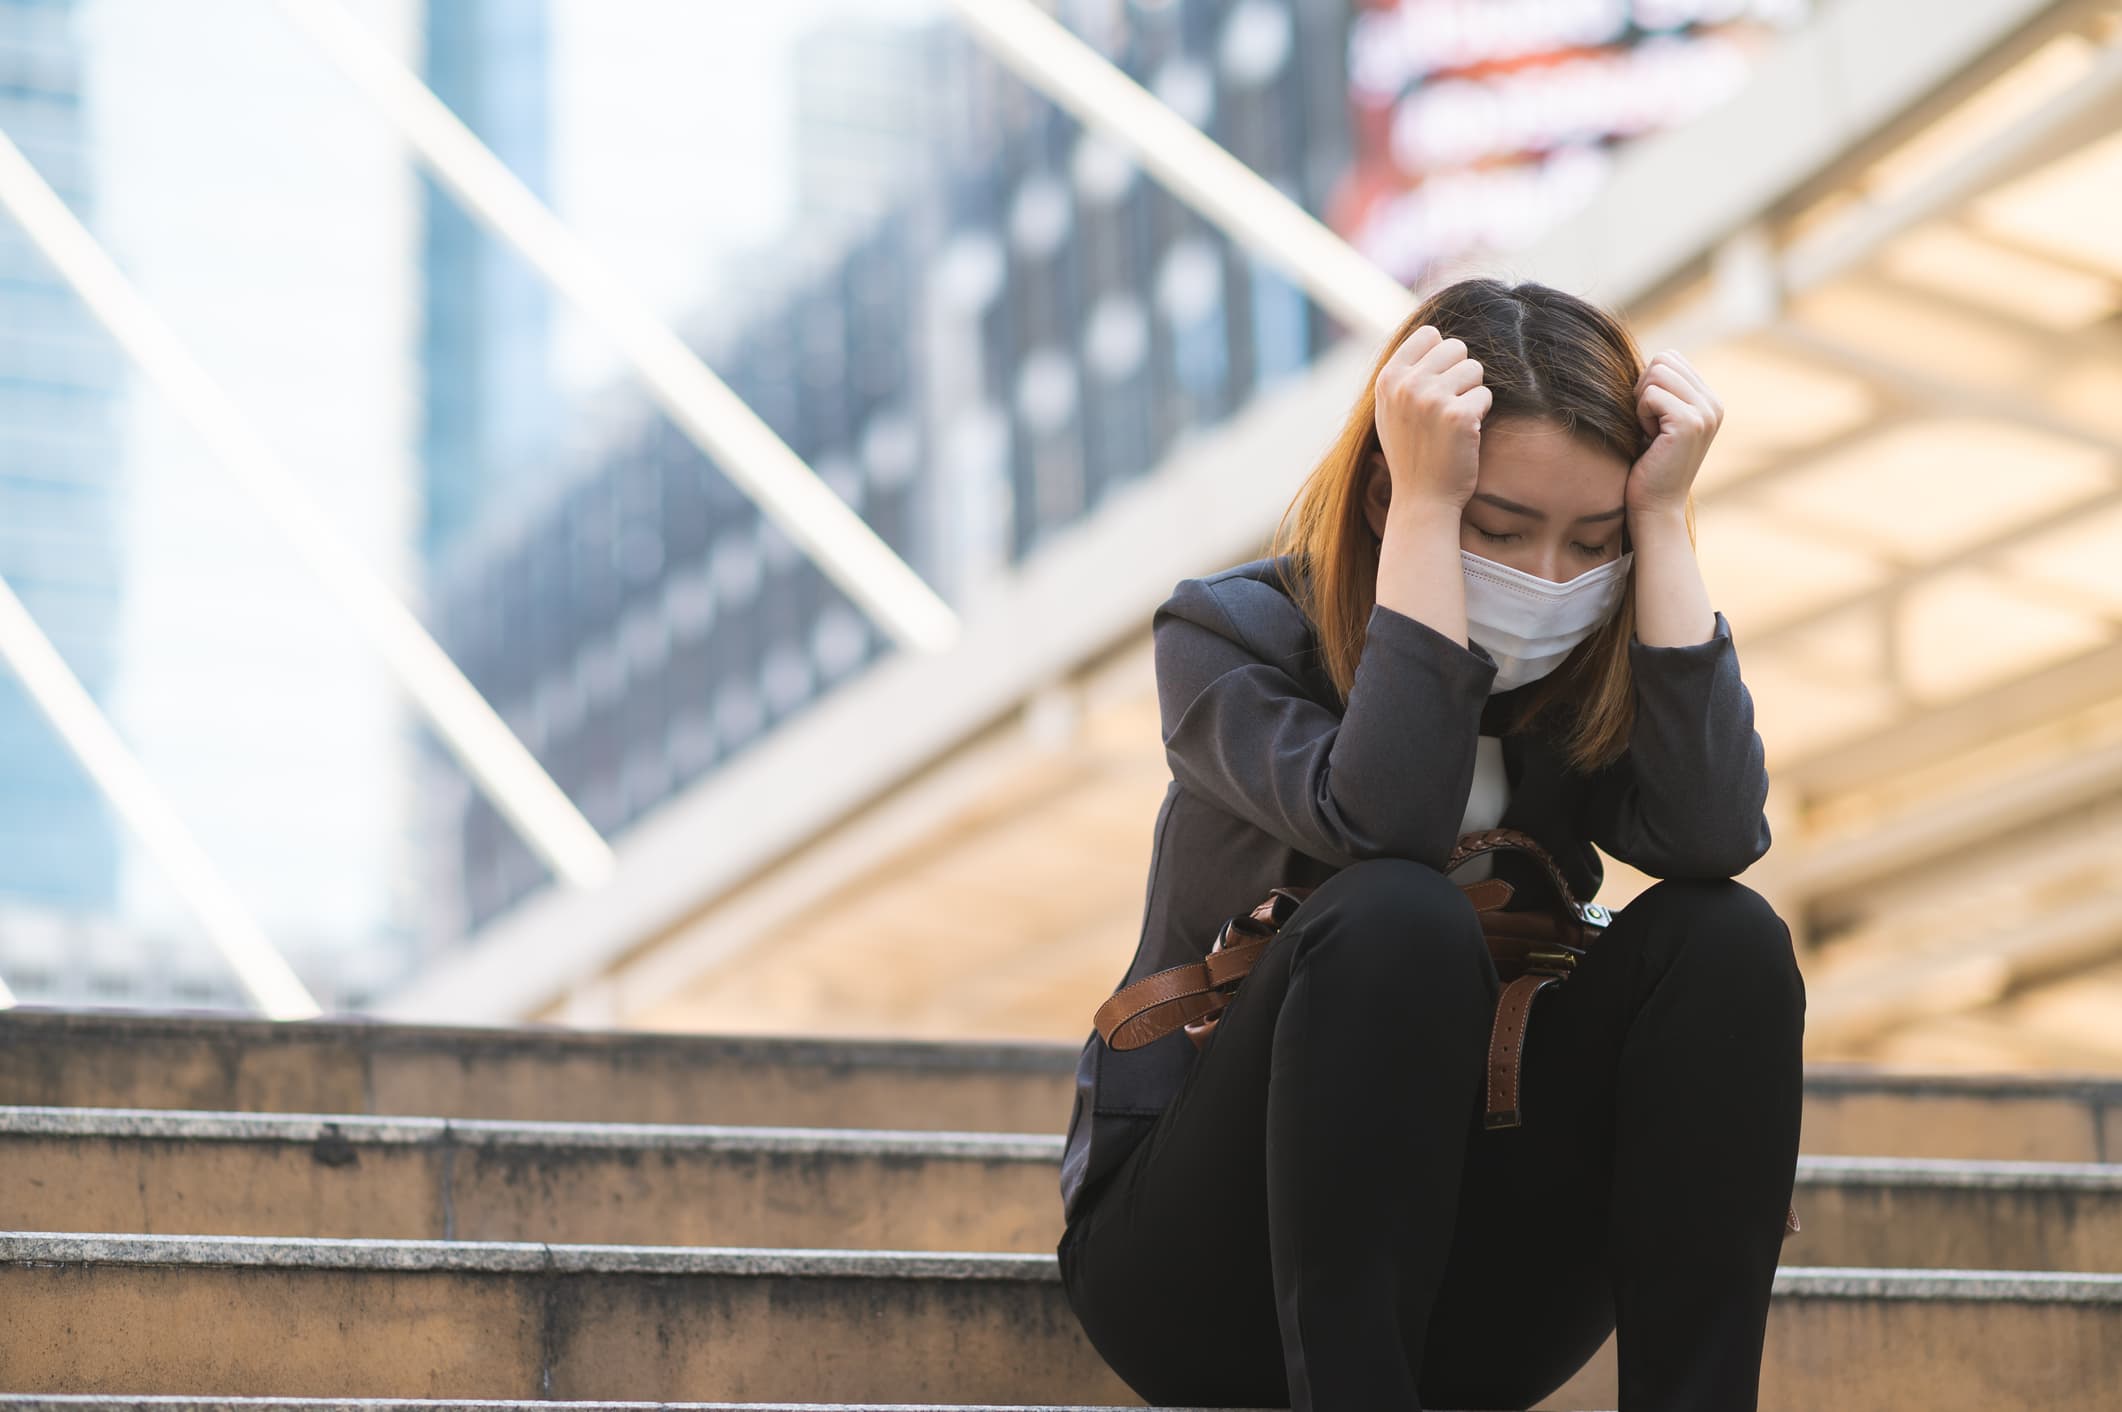 How millennials have been affected by unemployment during coronavirus